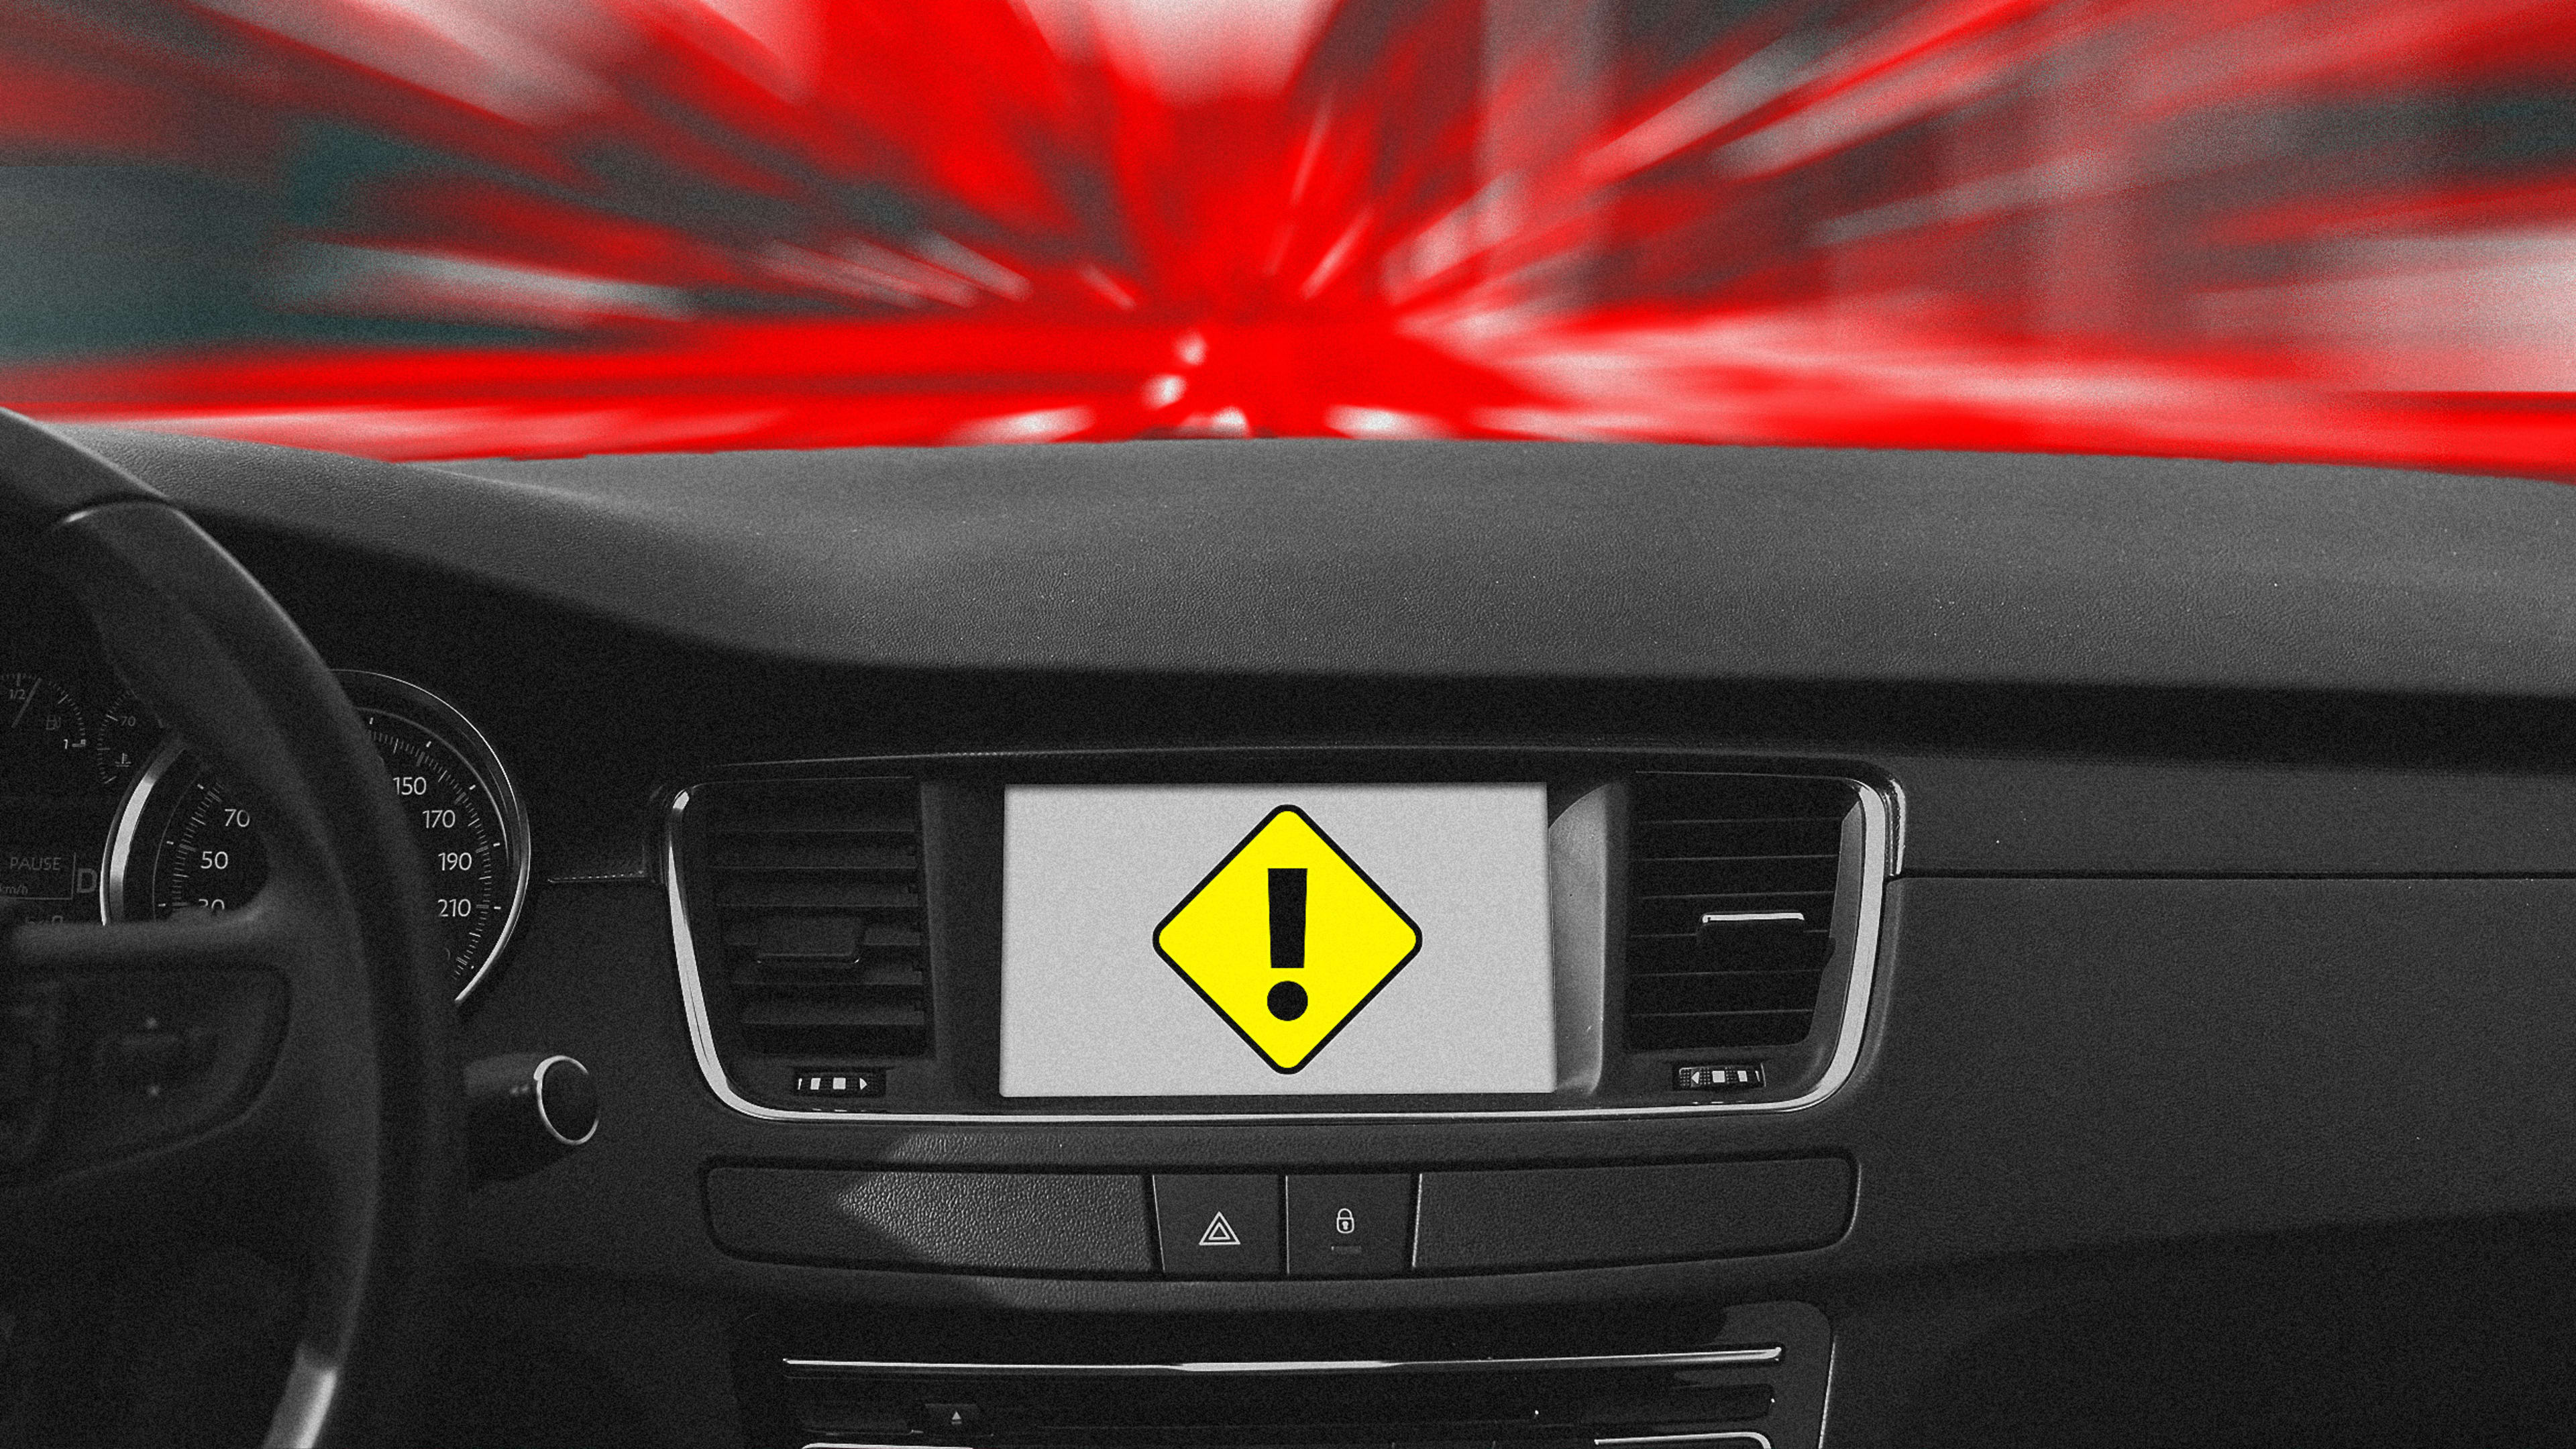 You shouldn’t be driving over 100 mph—and your car shouldn’t let you